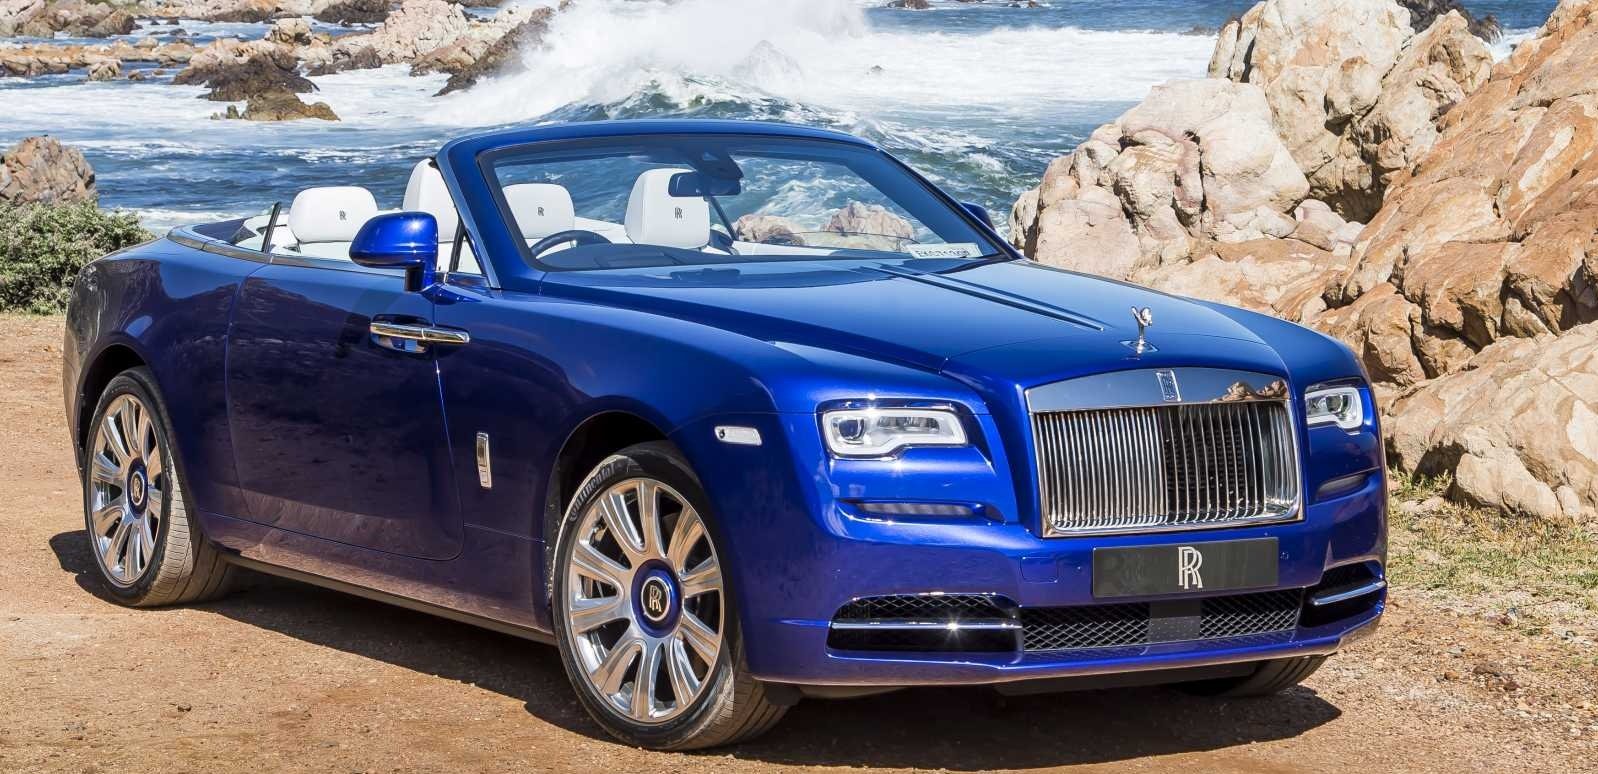 15 Most Expensive Cars in India - Rolls Royce Dawn